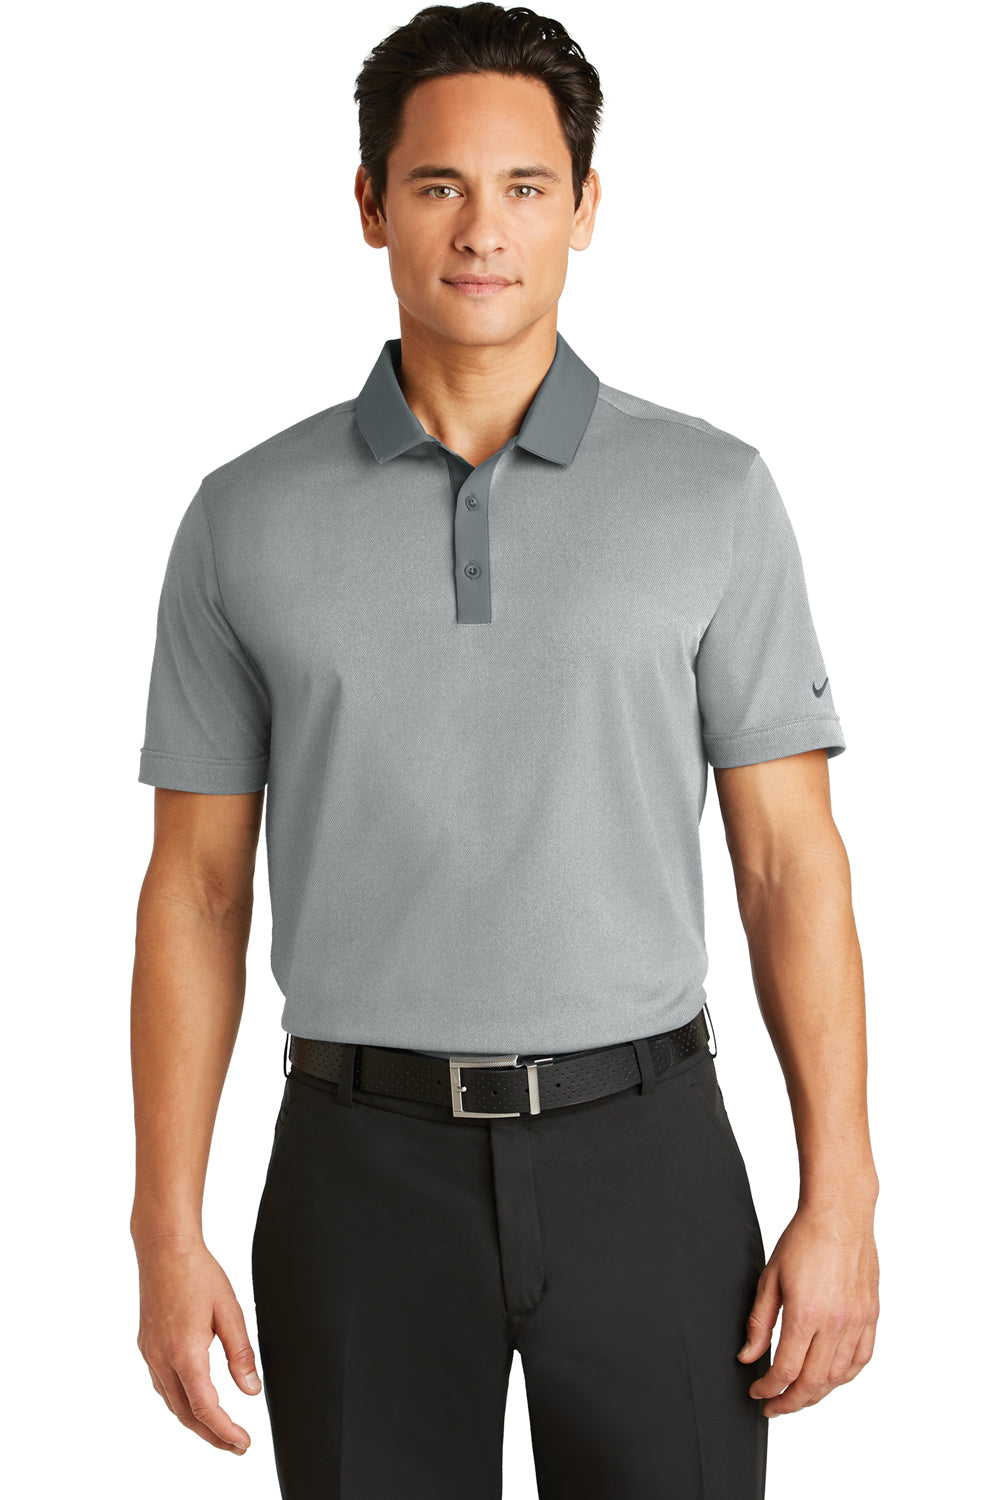 Nike 779798 Mens Dri-Fit Moisture Wicking Short Sleeve Polo Shirt Heather Grey Front